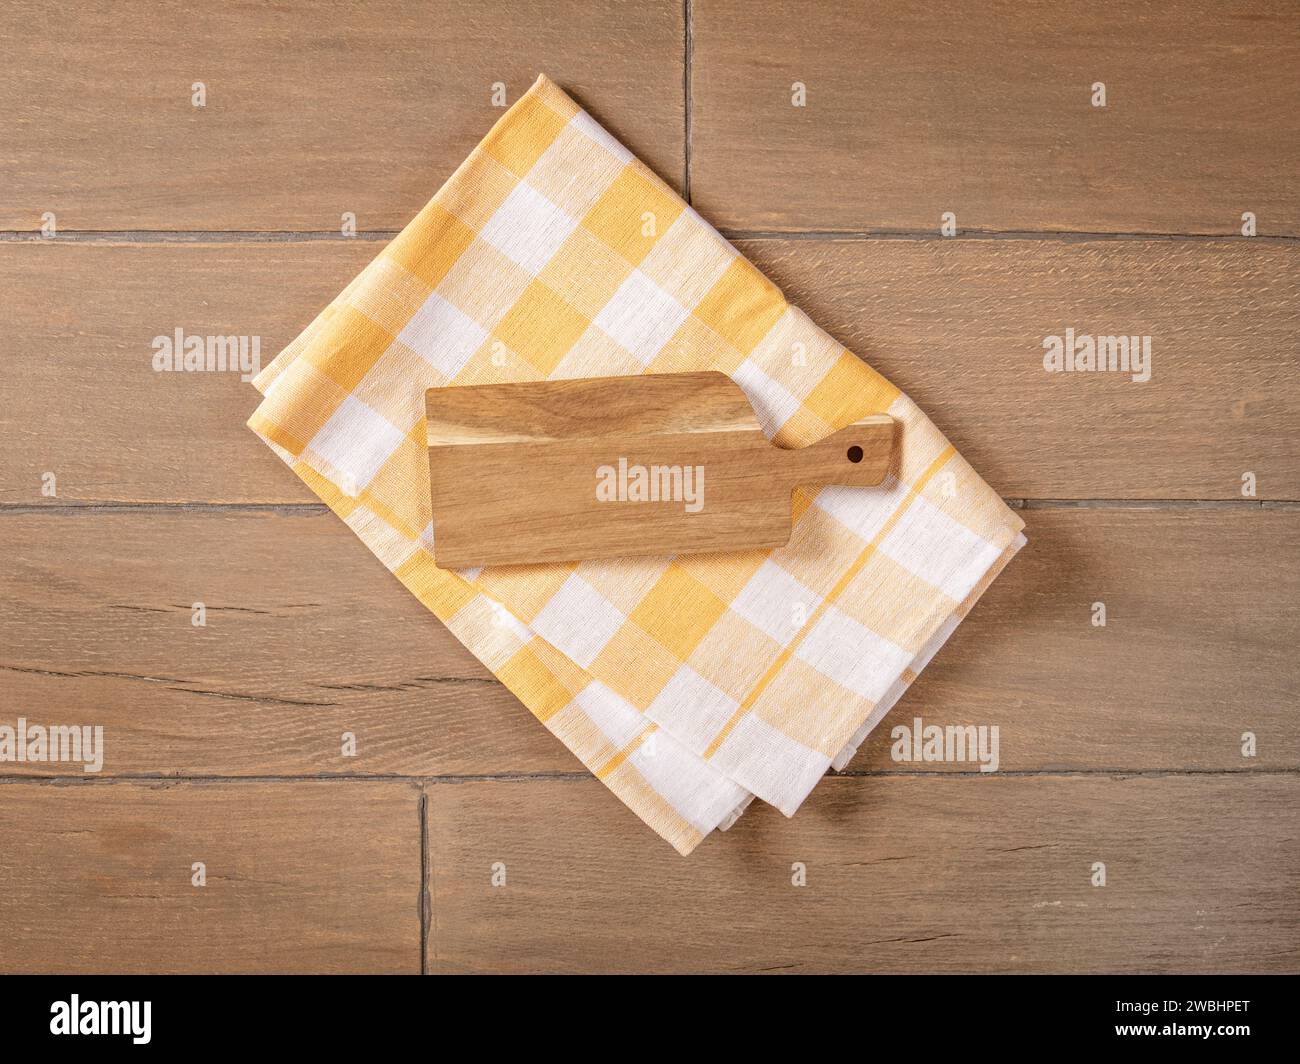 Rustic Kitchen Background with Cutting Board and Yellow Checkered Napkin on Wooden Table Stock Photo